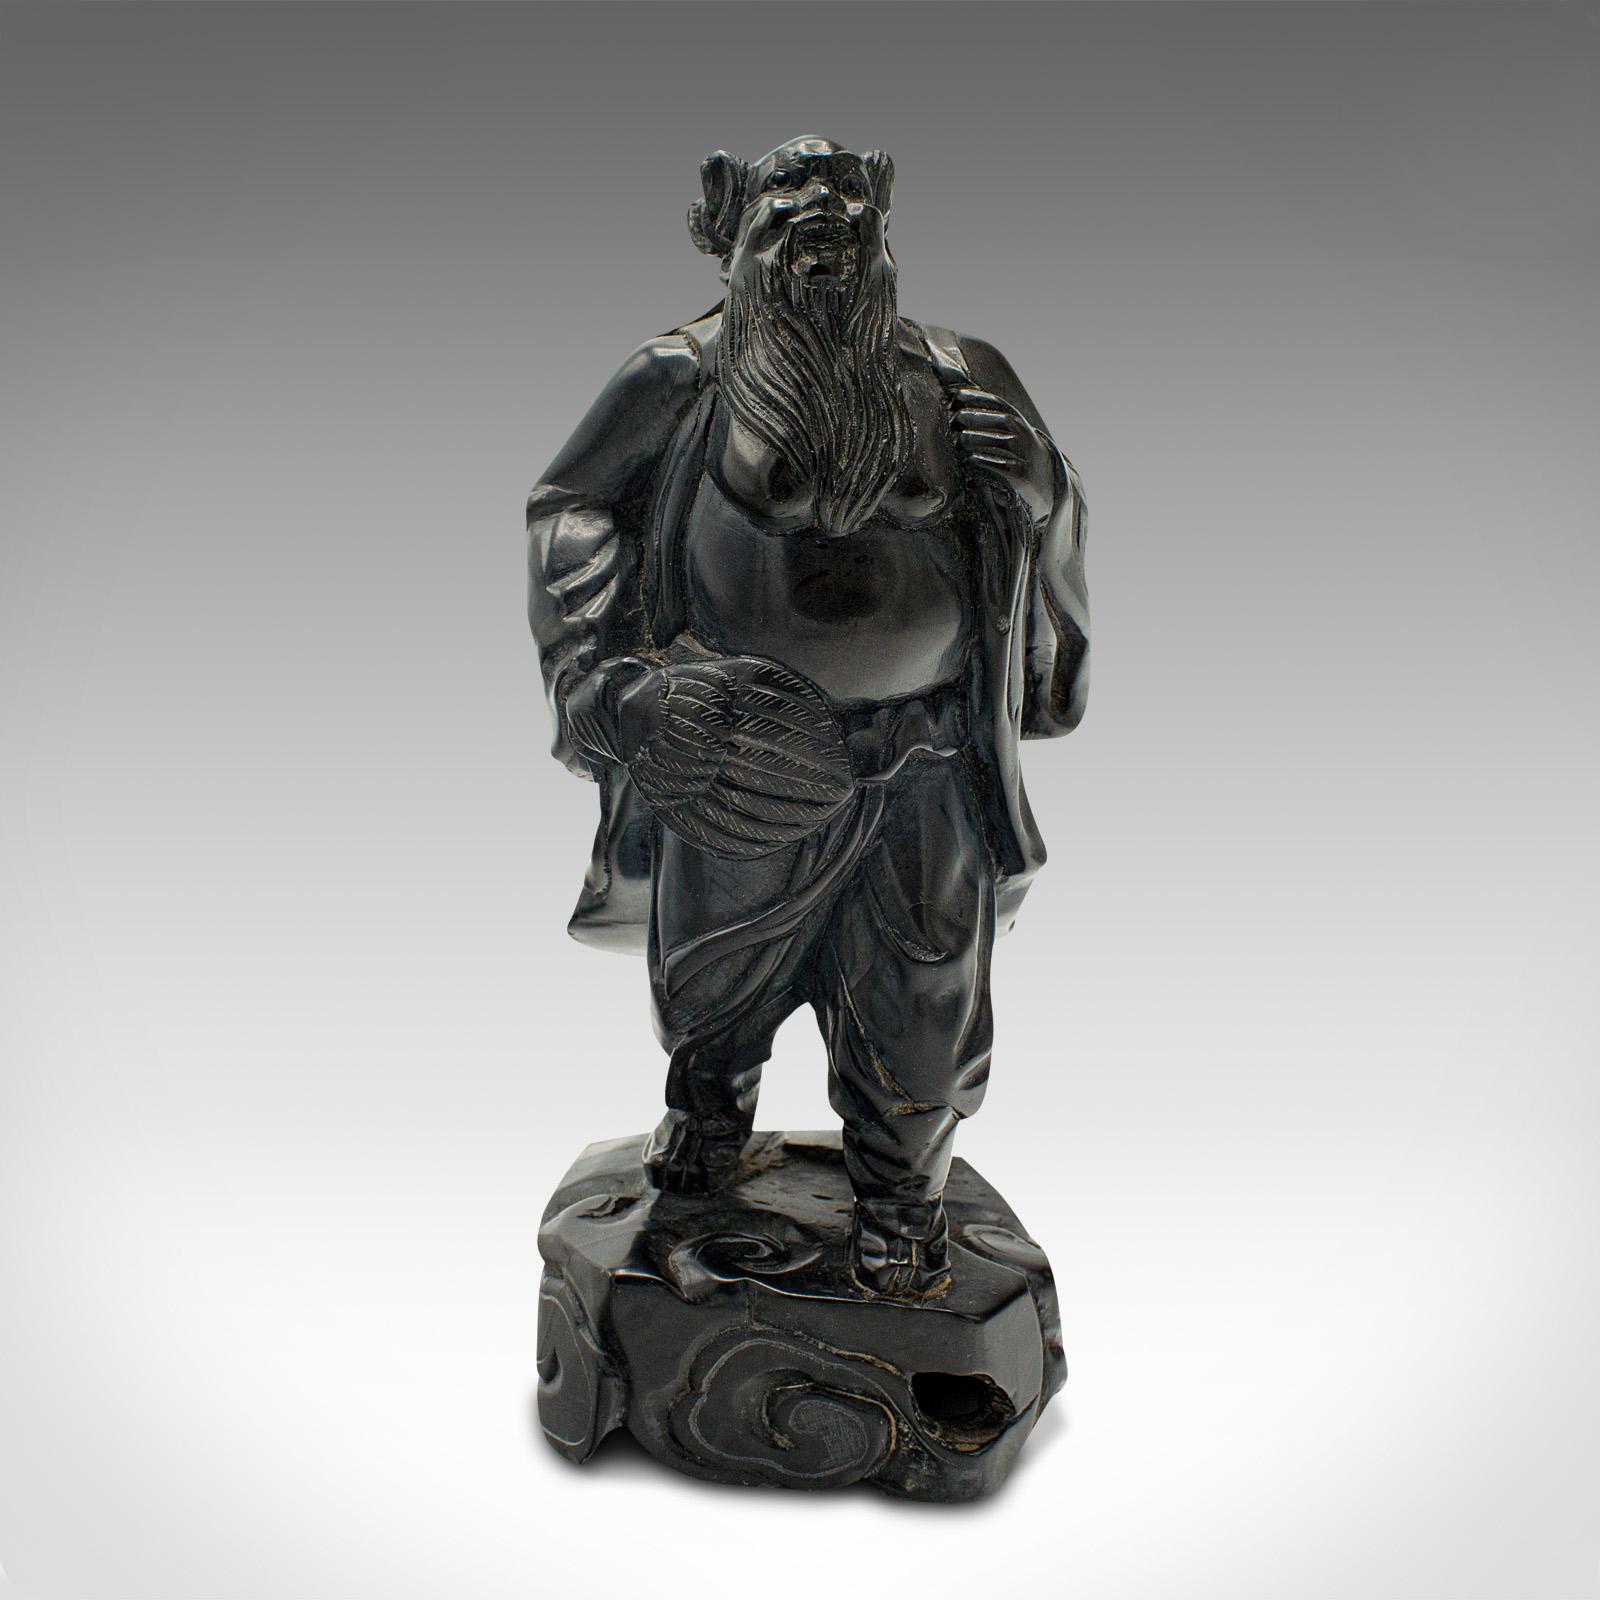 This is a small vintage carved Oriental figure. A Chinese, hand-carved black onyx traditional travelling man statue, dating to the late Art Deco period, circa 1940.

Striking carved figure graced with wonderful craftsmanship
Displays a desirable